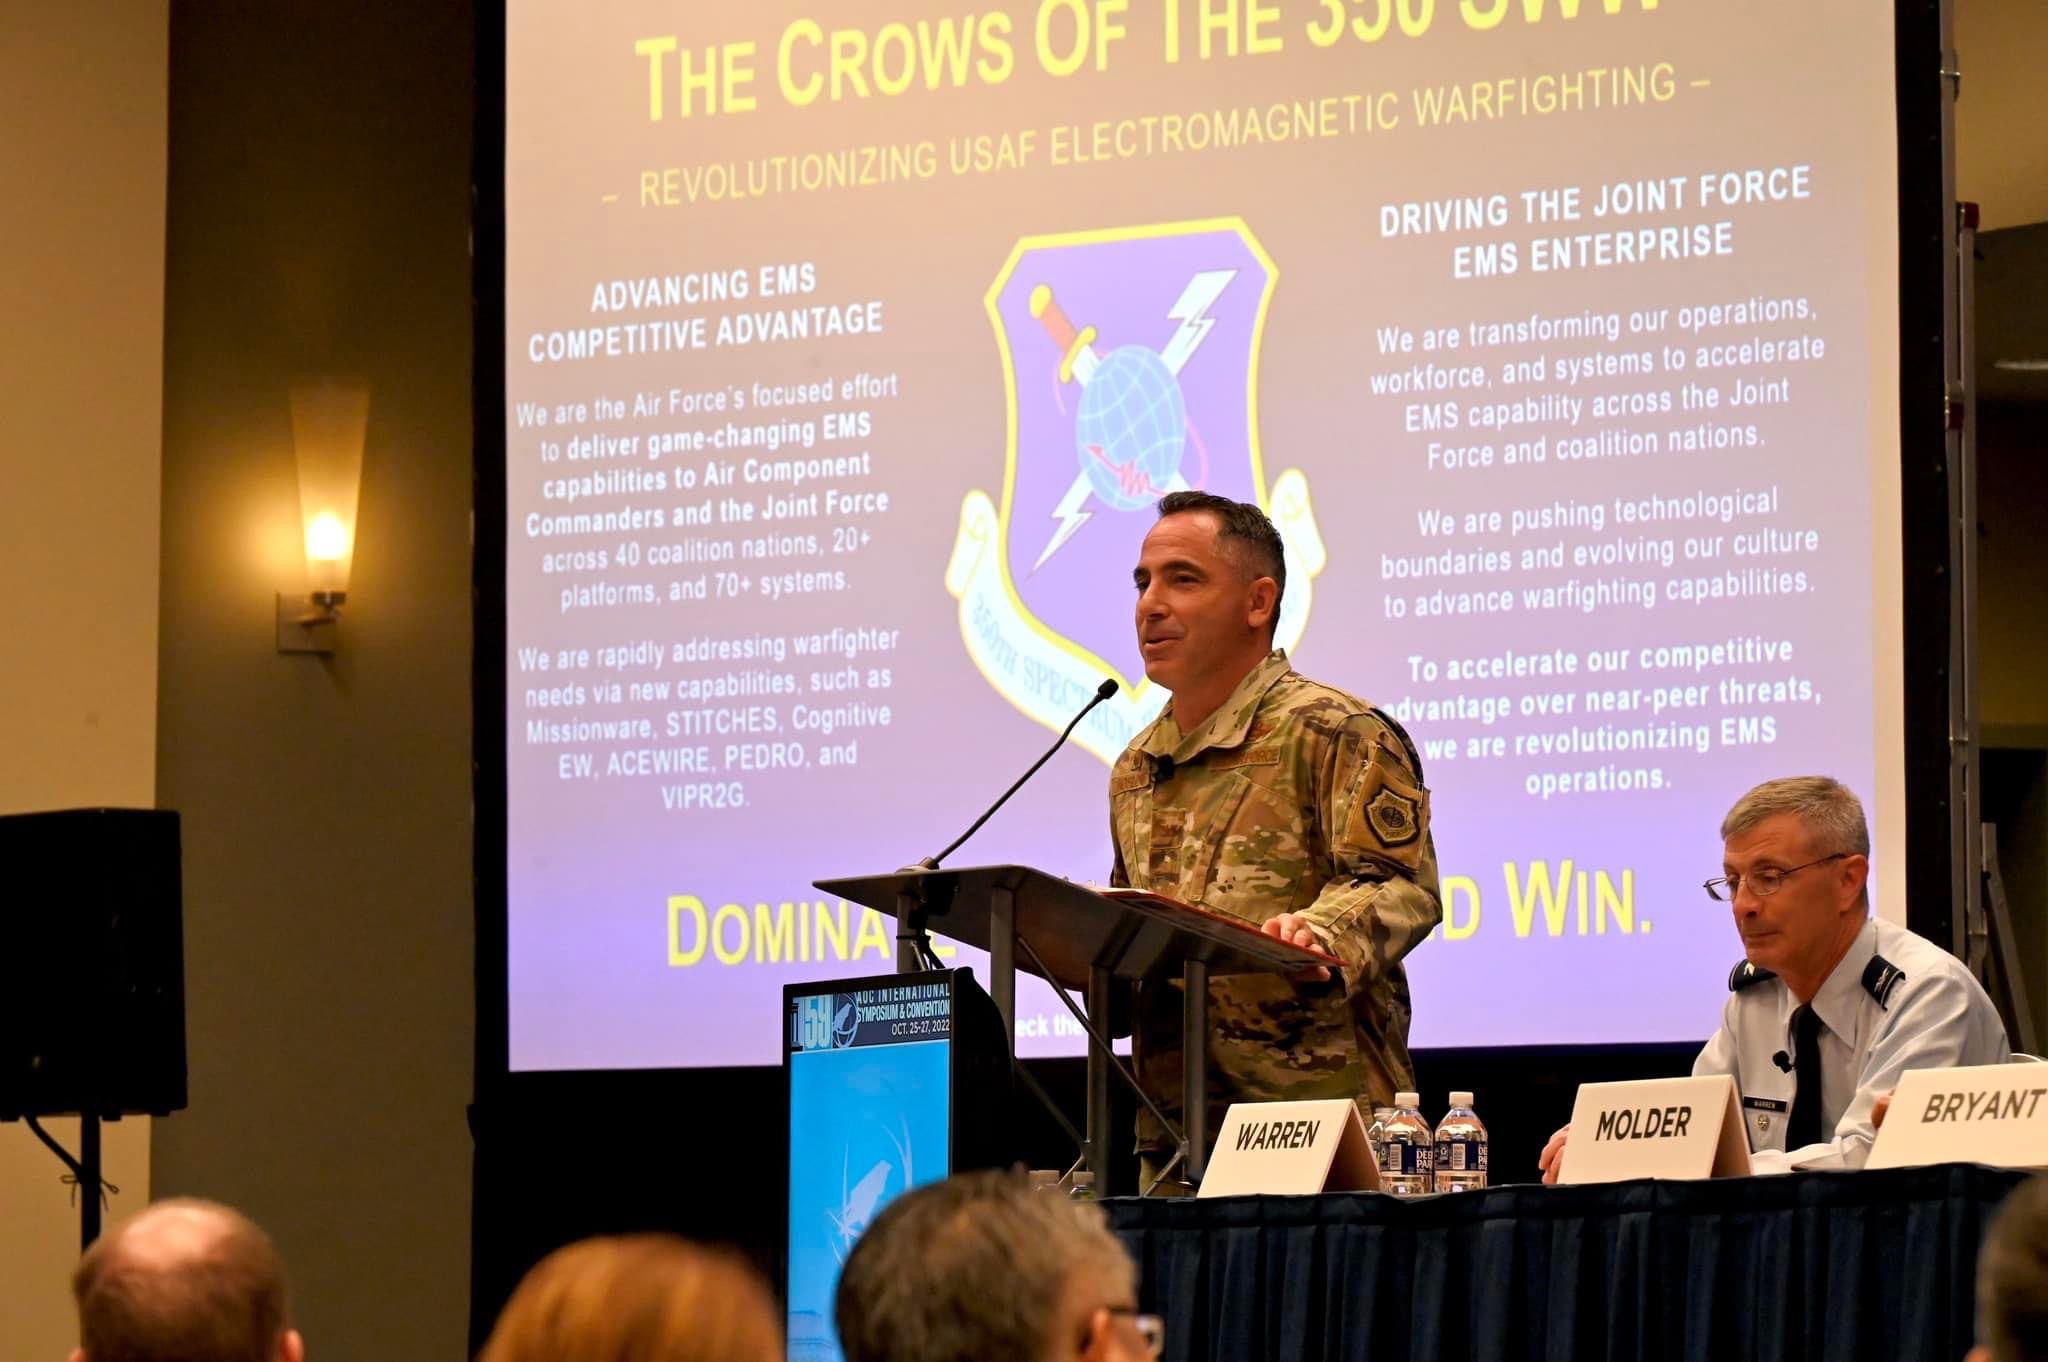 U.S. Air Force Col Josh Koslov, 350th Spectrum Warfare commander, briefs about the wing’s mission during a panel discussion at the Association of Old Crows (AOC) at the 59th Annual AOC International Symposium &amp; Conference, Washington D.C., Oct. 26, 2022. <em>Credit: U.S. Air Force photo by 1st Lt. Benjamin Aronson</em>